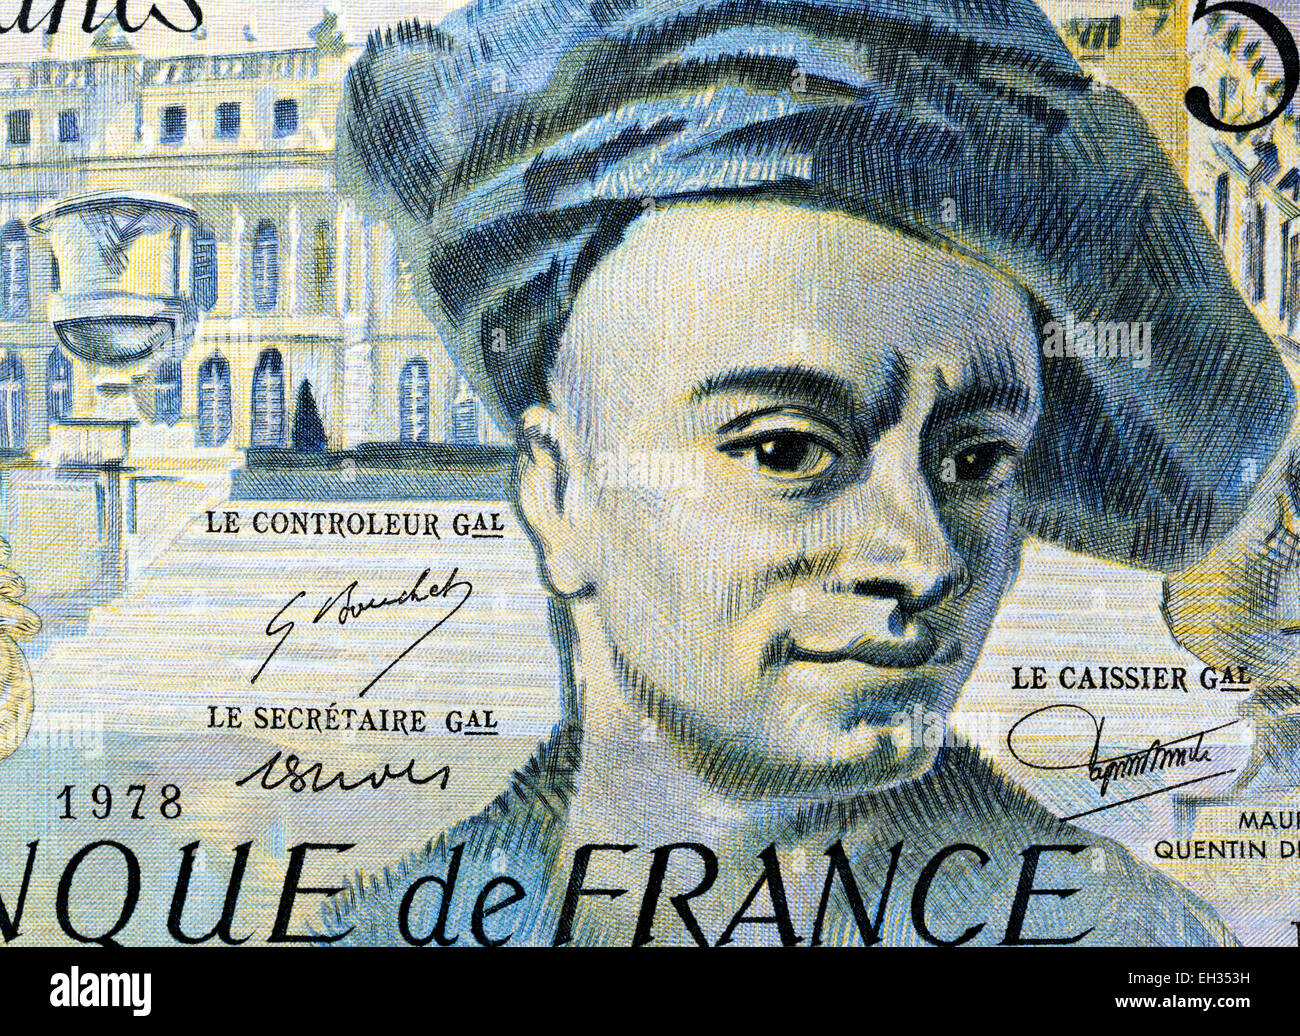 Maurice Quentin de la Tour from 50 francs banknote, France, 1978 Stock Photo